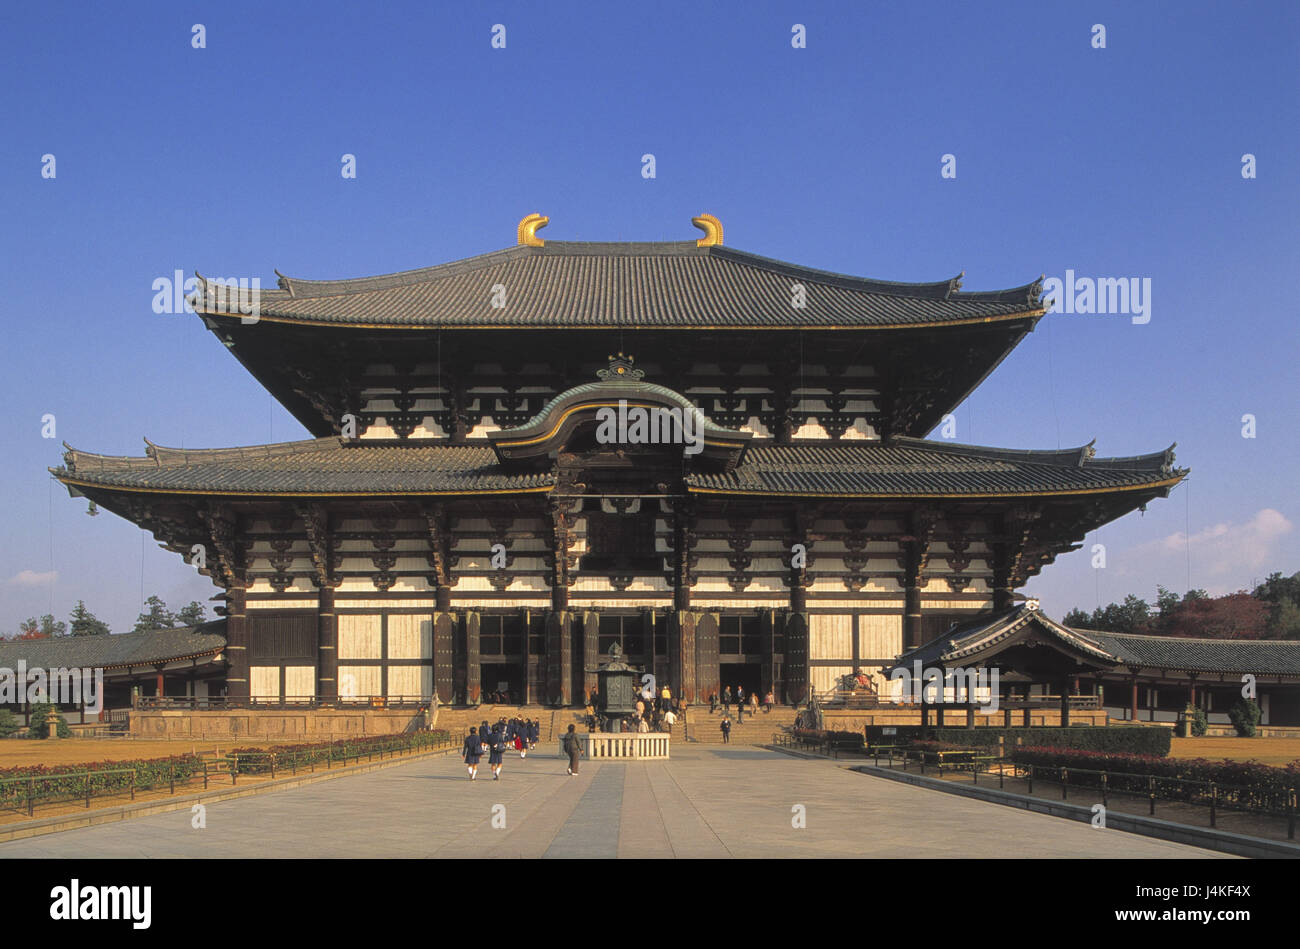 Japan, Nara, Todaiji temple, Buddha's hall Asia, Eastern Asia, island state, Nippon, Nihon Koku, Honshu, UNESCO-world cultural heritage, building, architecture, hall, timber-frame construction way, the biggest wooden building of the world, place of interest, landmark, religion, sacred construction, Buddhism, visitor Stock Photo